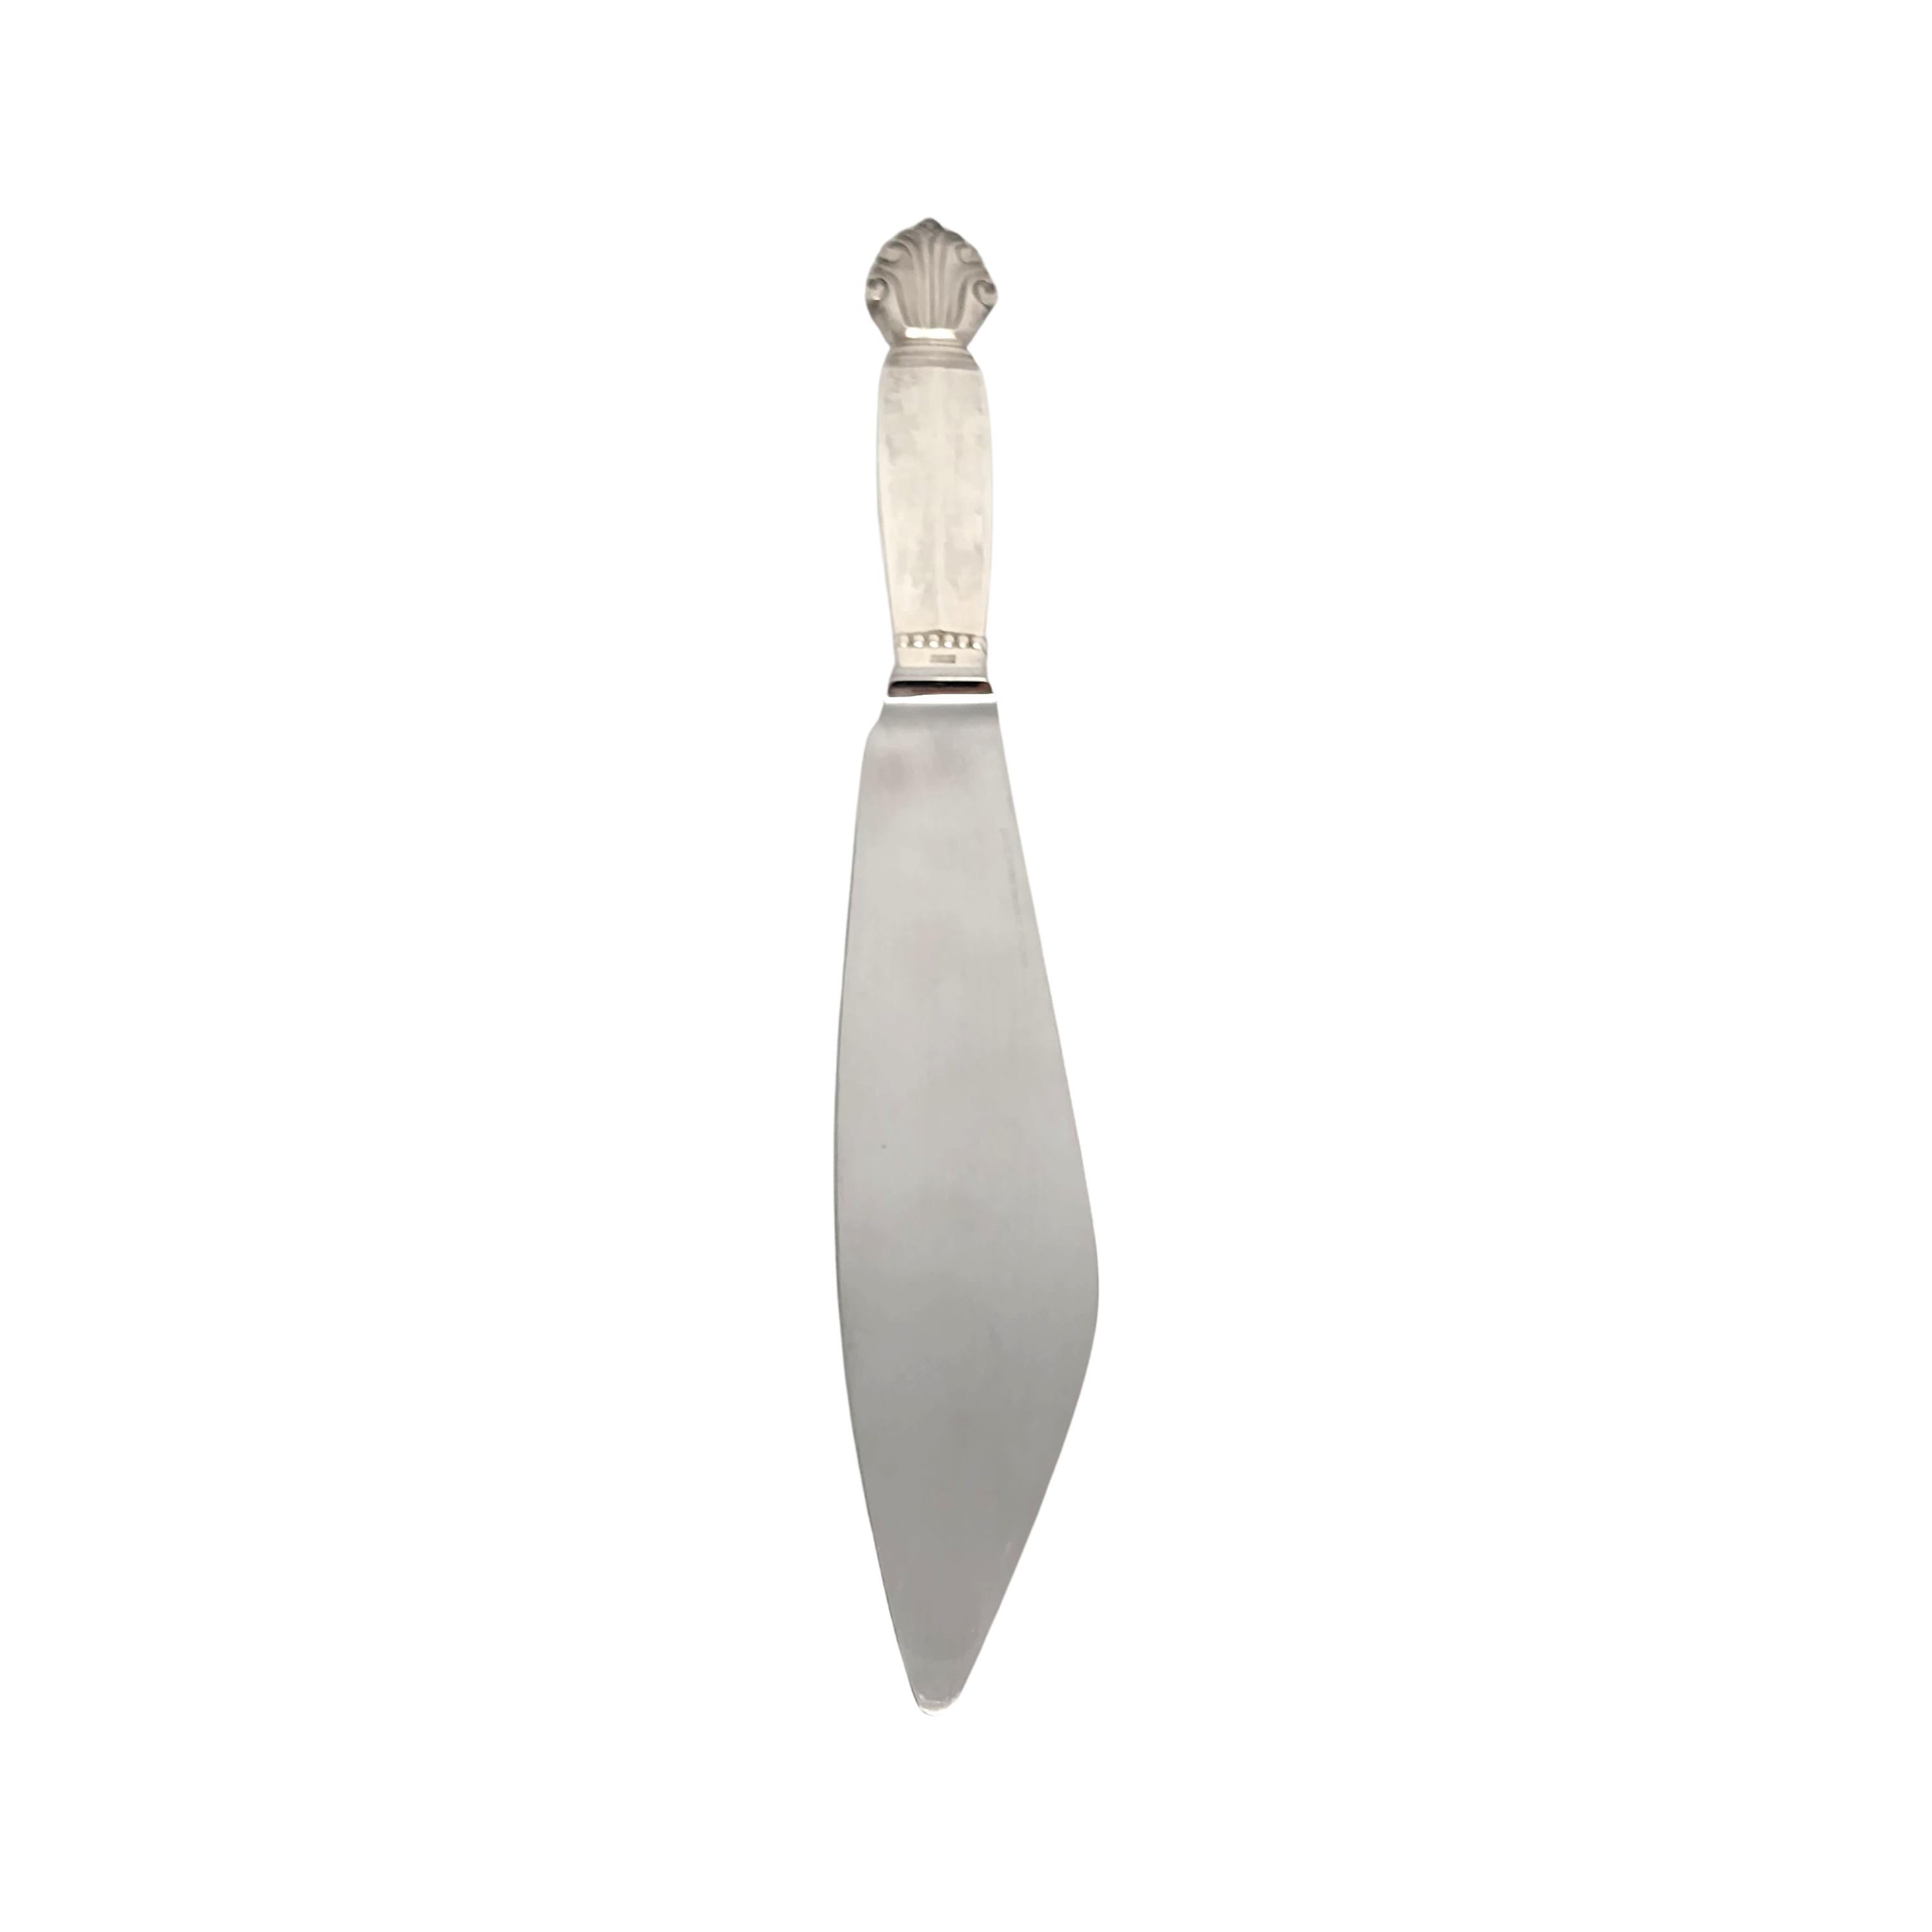 Sterling silver handle cake serving knife by Georg Jensen in the Acanthus pattern.

The Acanthus pattern was designed by Johan Rohde and introduced in 1917. The inspiration for this pattern is not of nature, but a classic motif treated in a rather